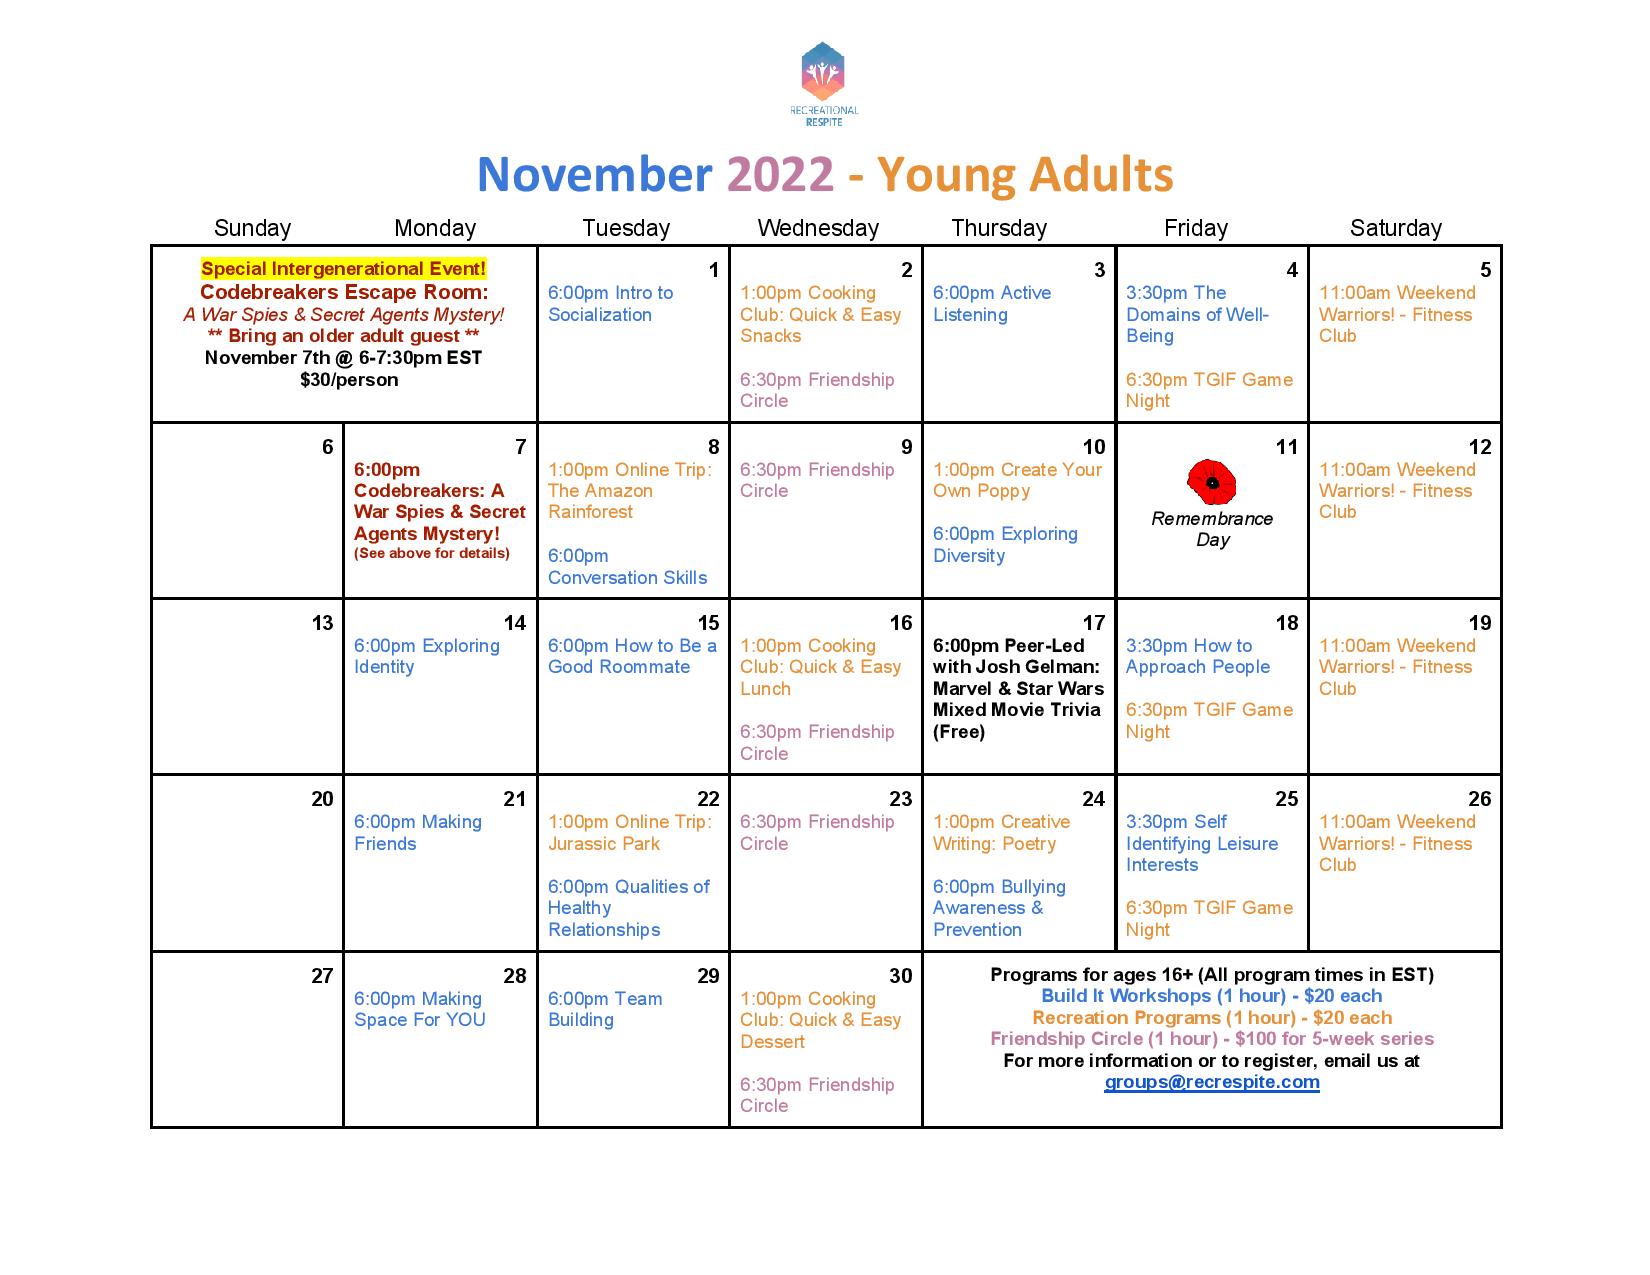 calendar of activity programs for young adults ages 16+